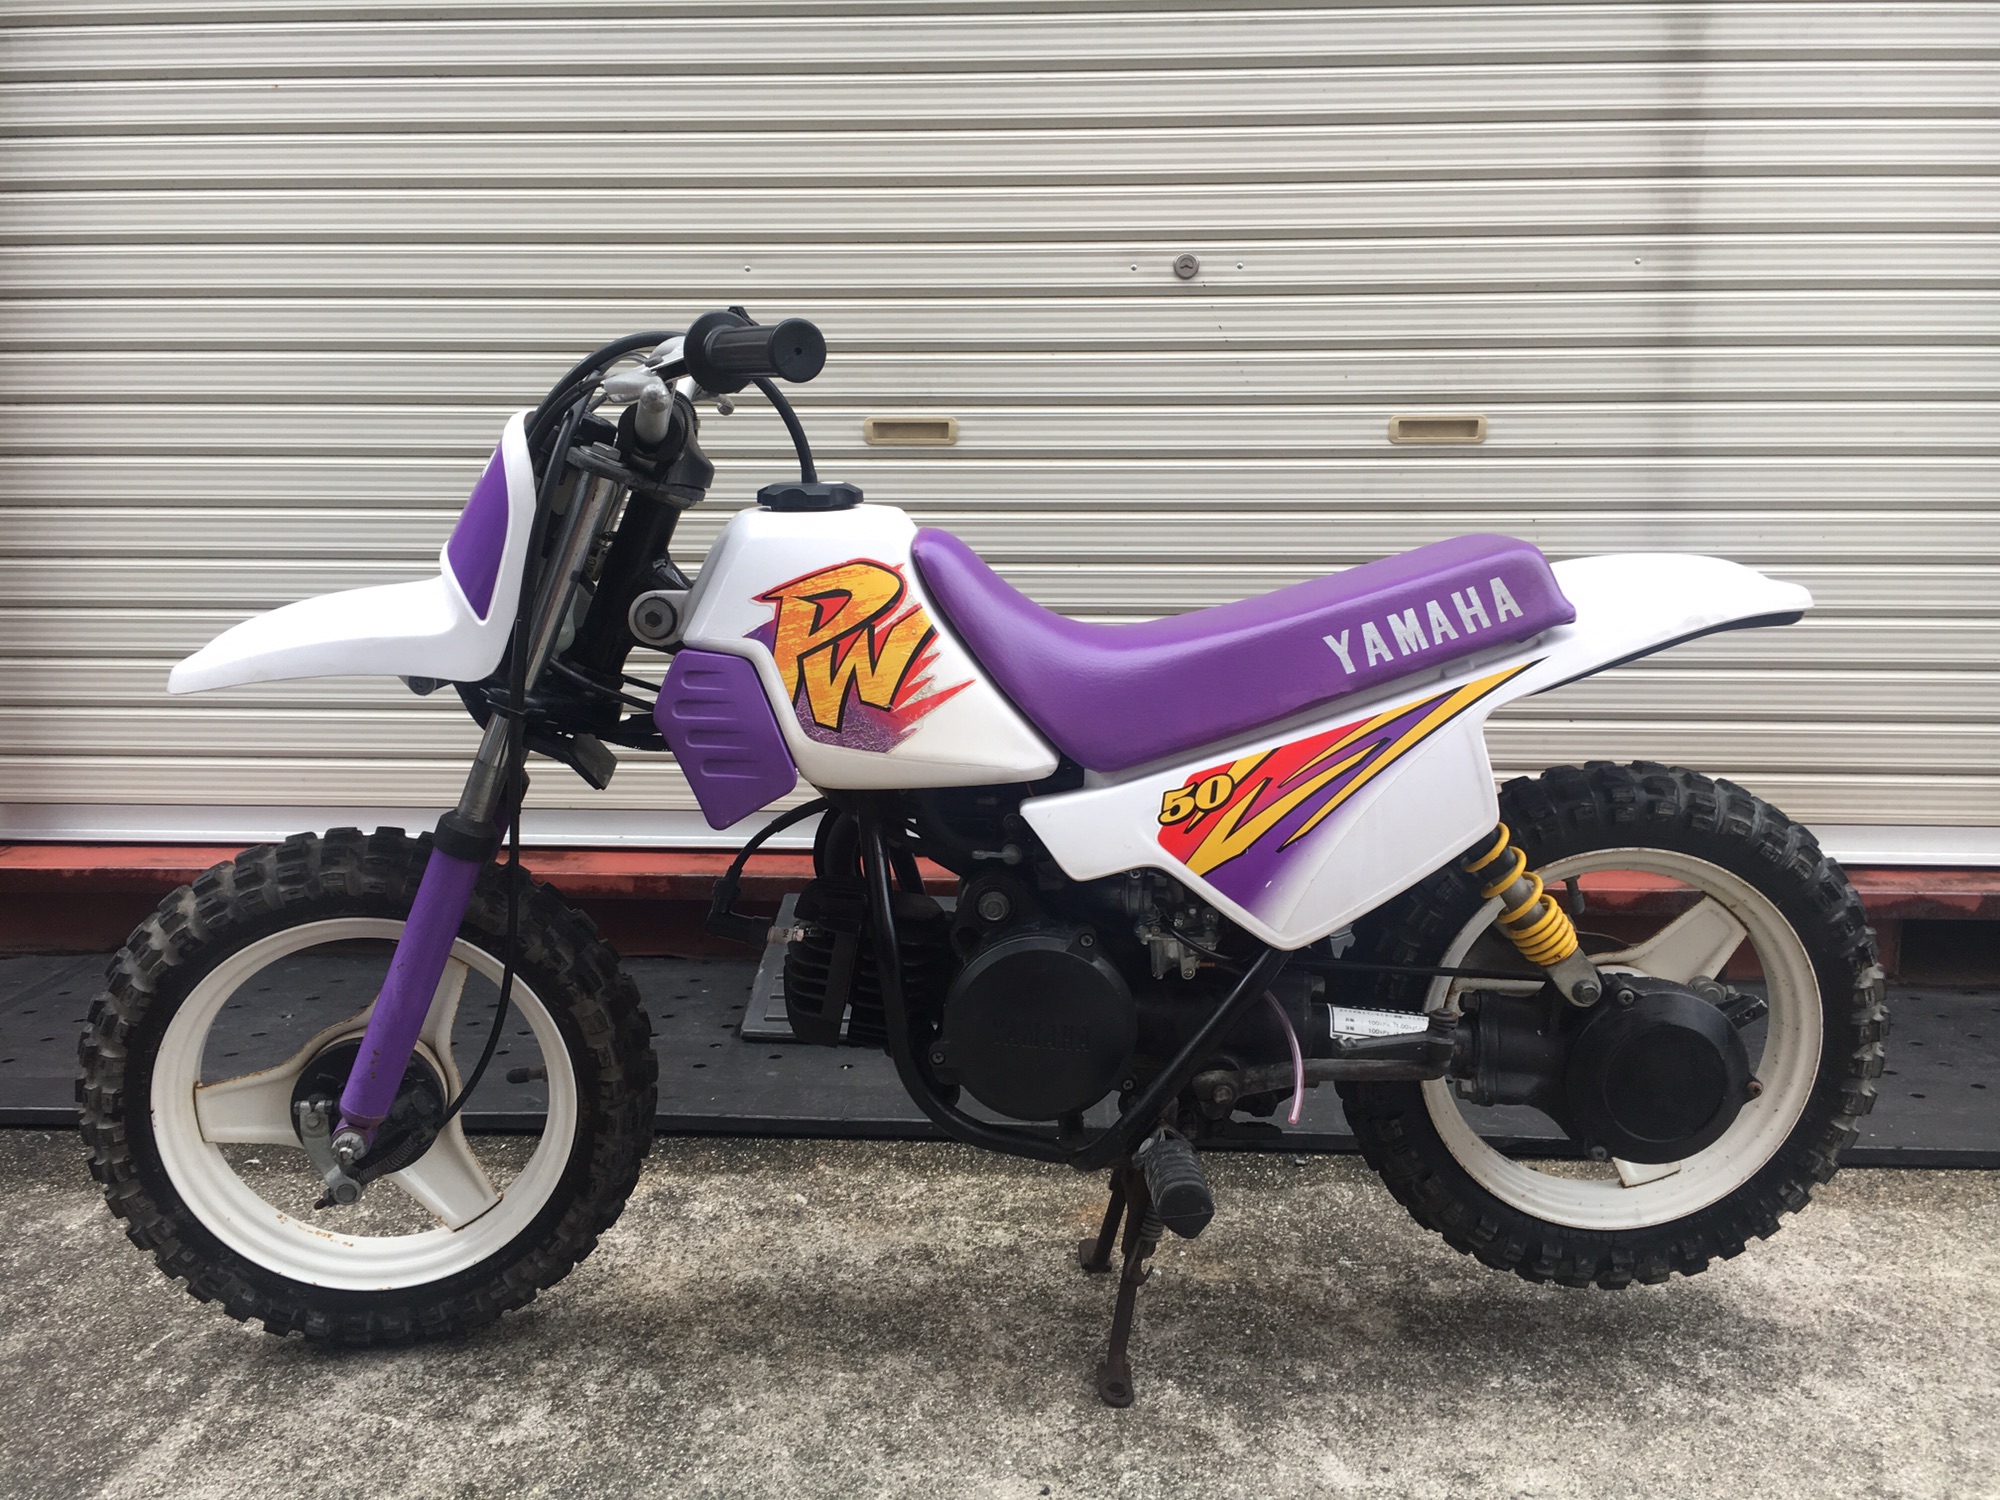 PW50 エンジンOH ピストン、キャブ新品 SOLD OUT10万円 | 三重県桑名市 ...